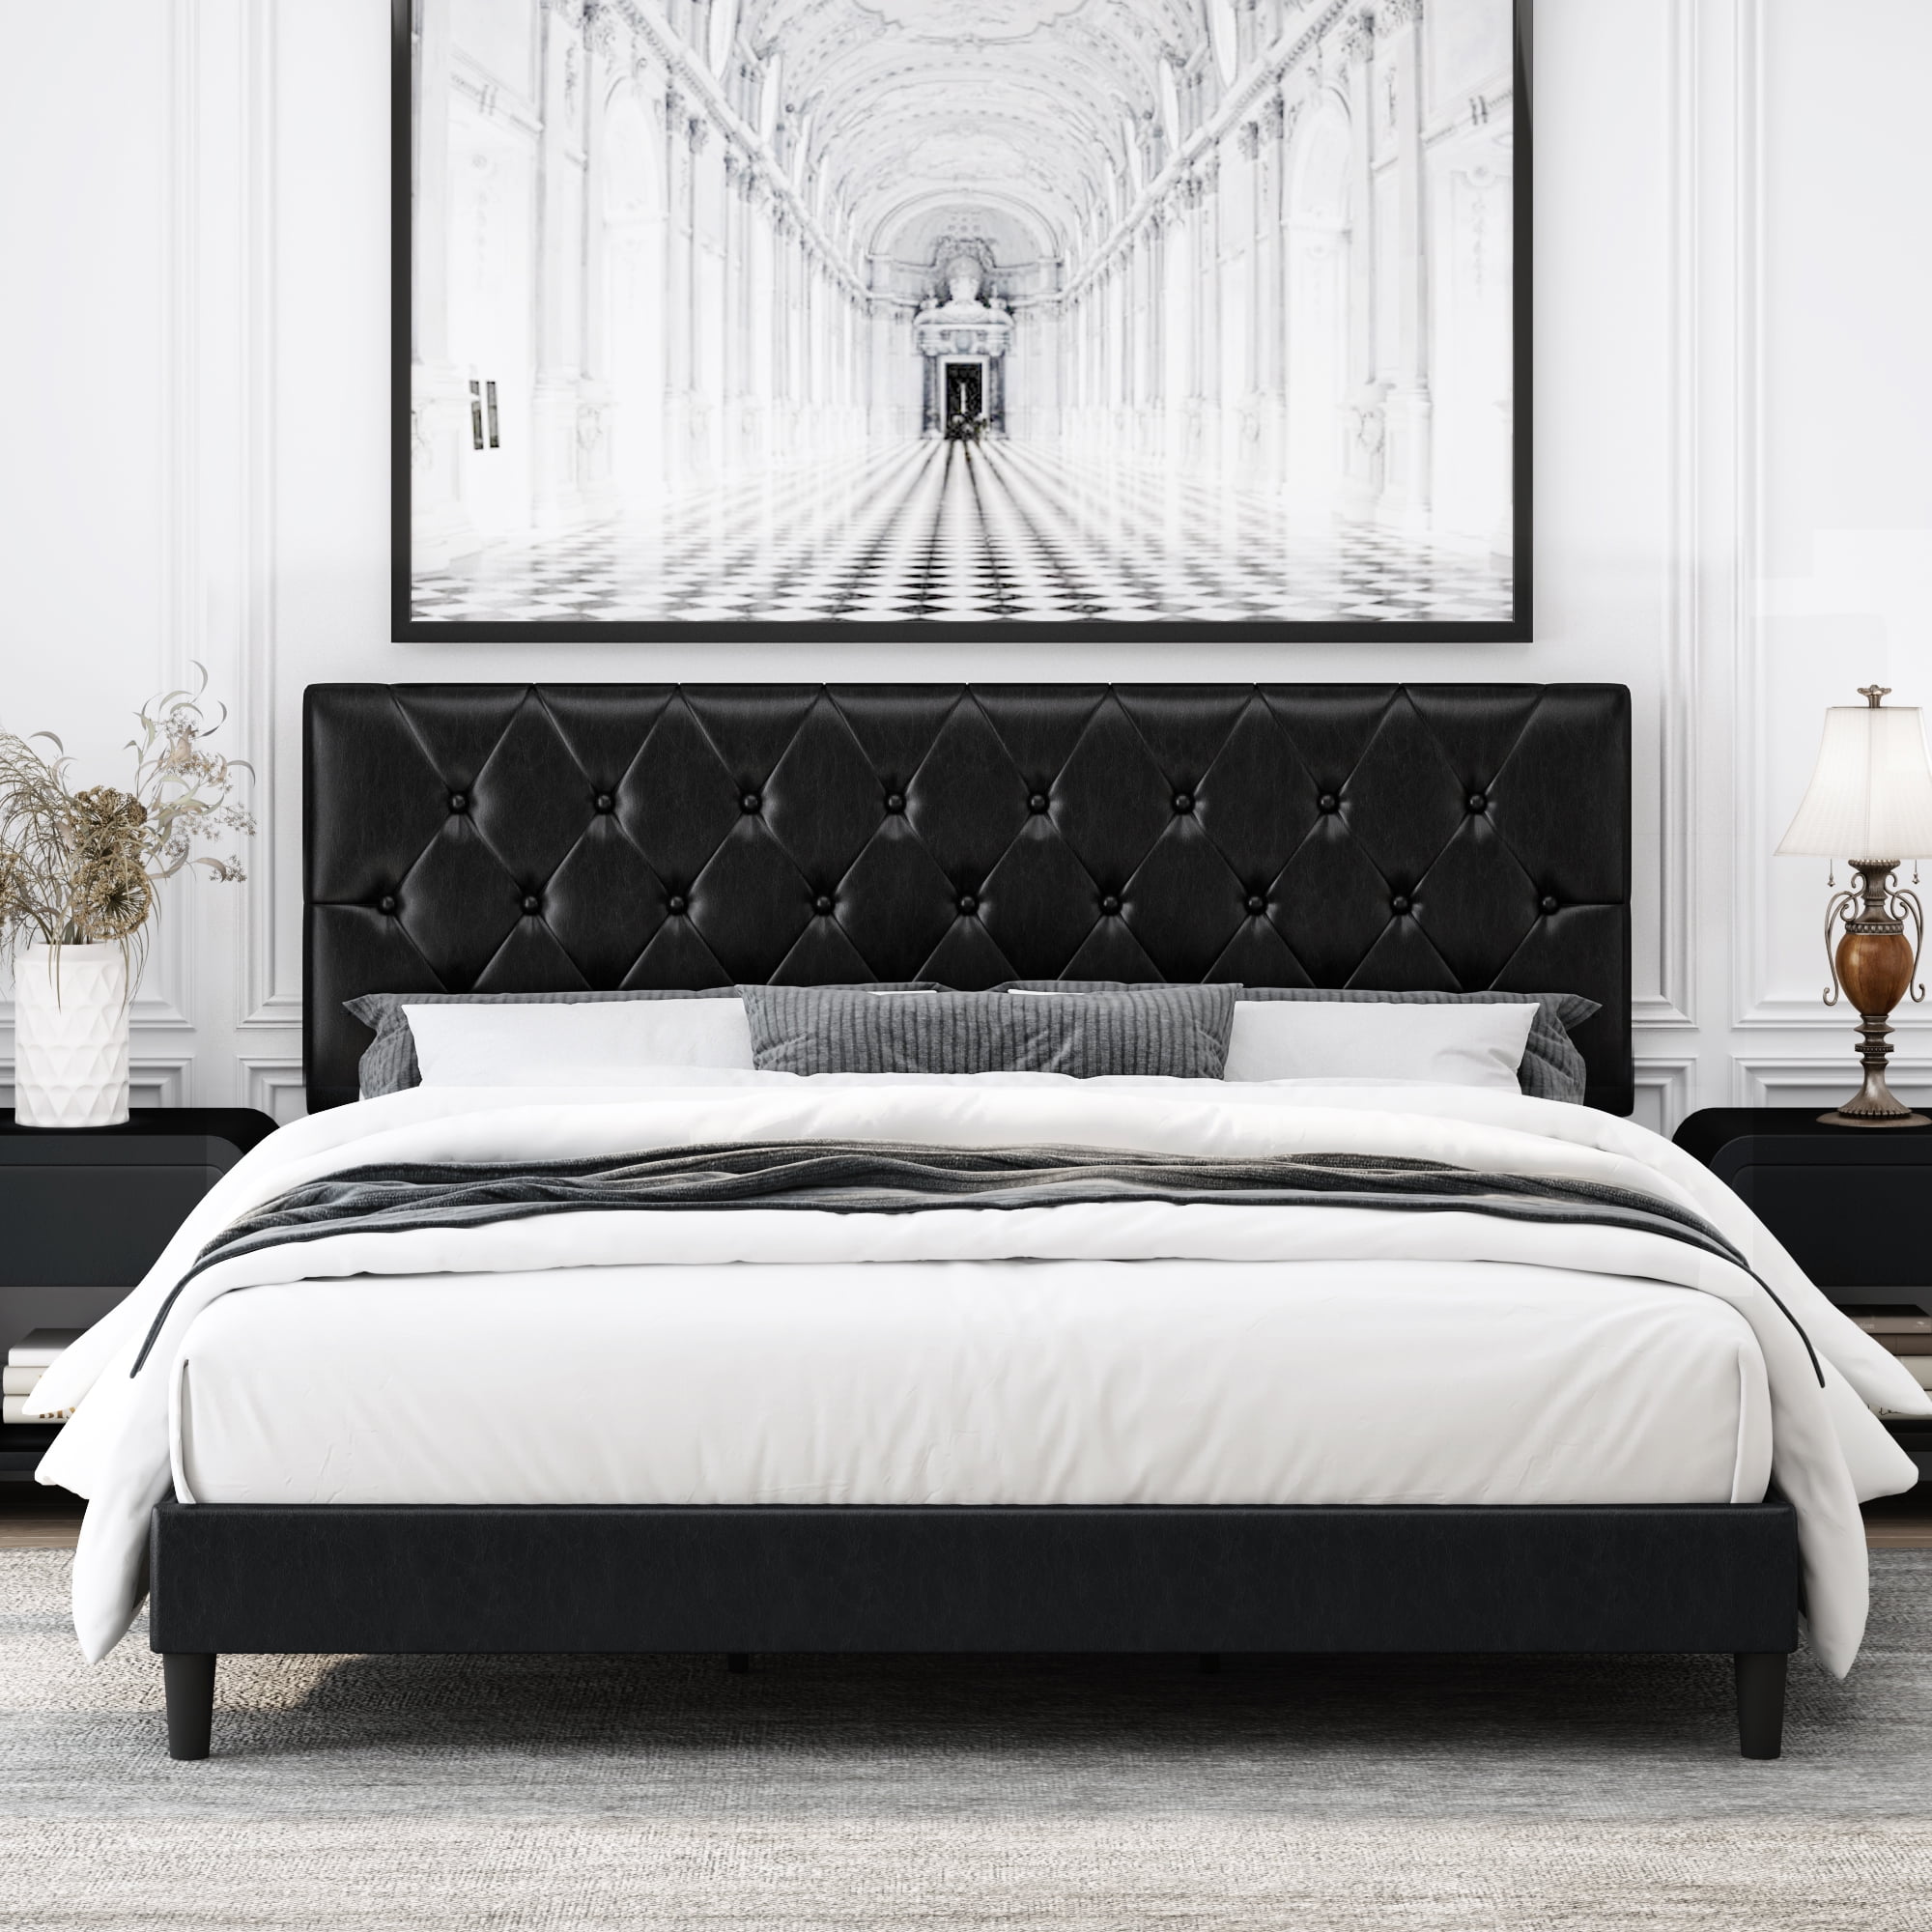 Homfa Queen Bed Frame, Black Faux Leather Upholstered Button Tufted Low Profile Platform Bed Frame with Adjustable Headboard for Bedroom